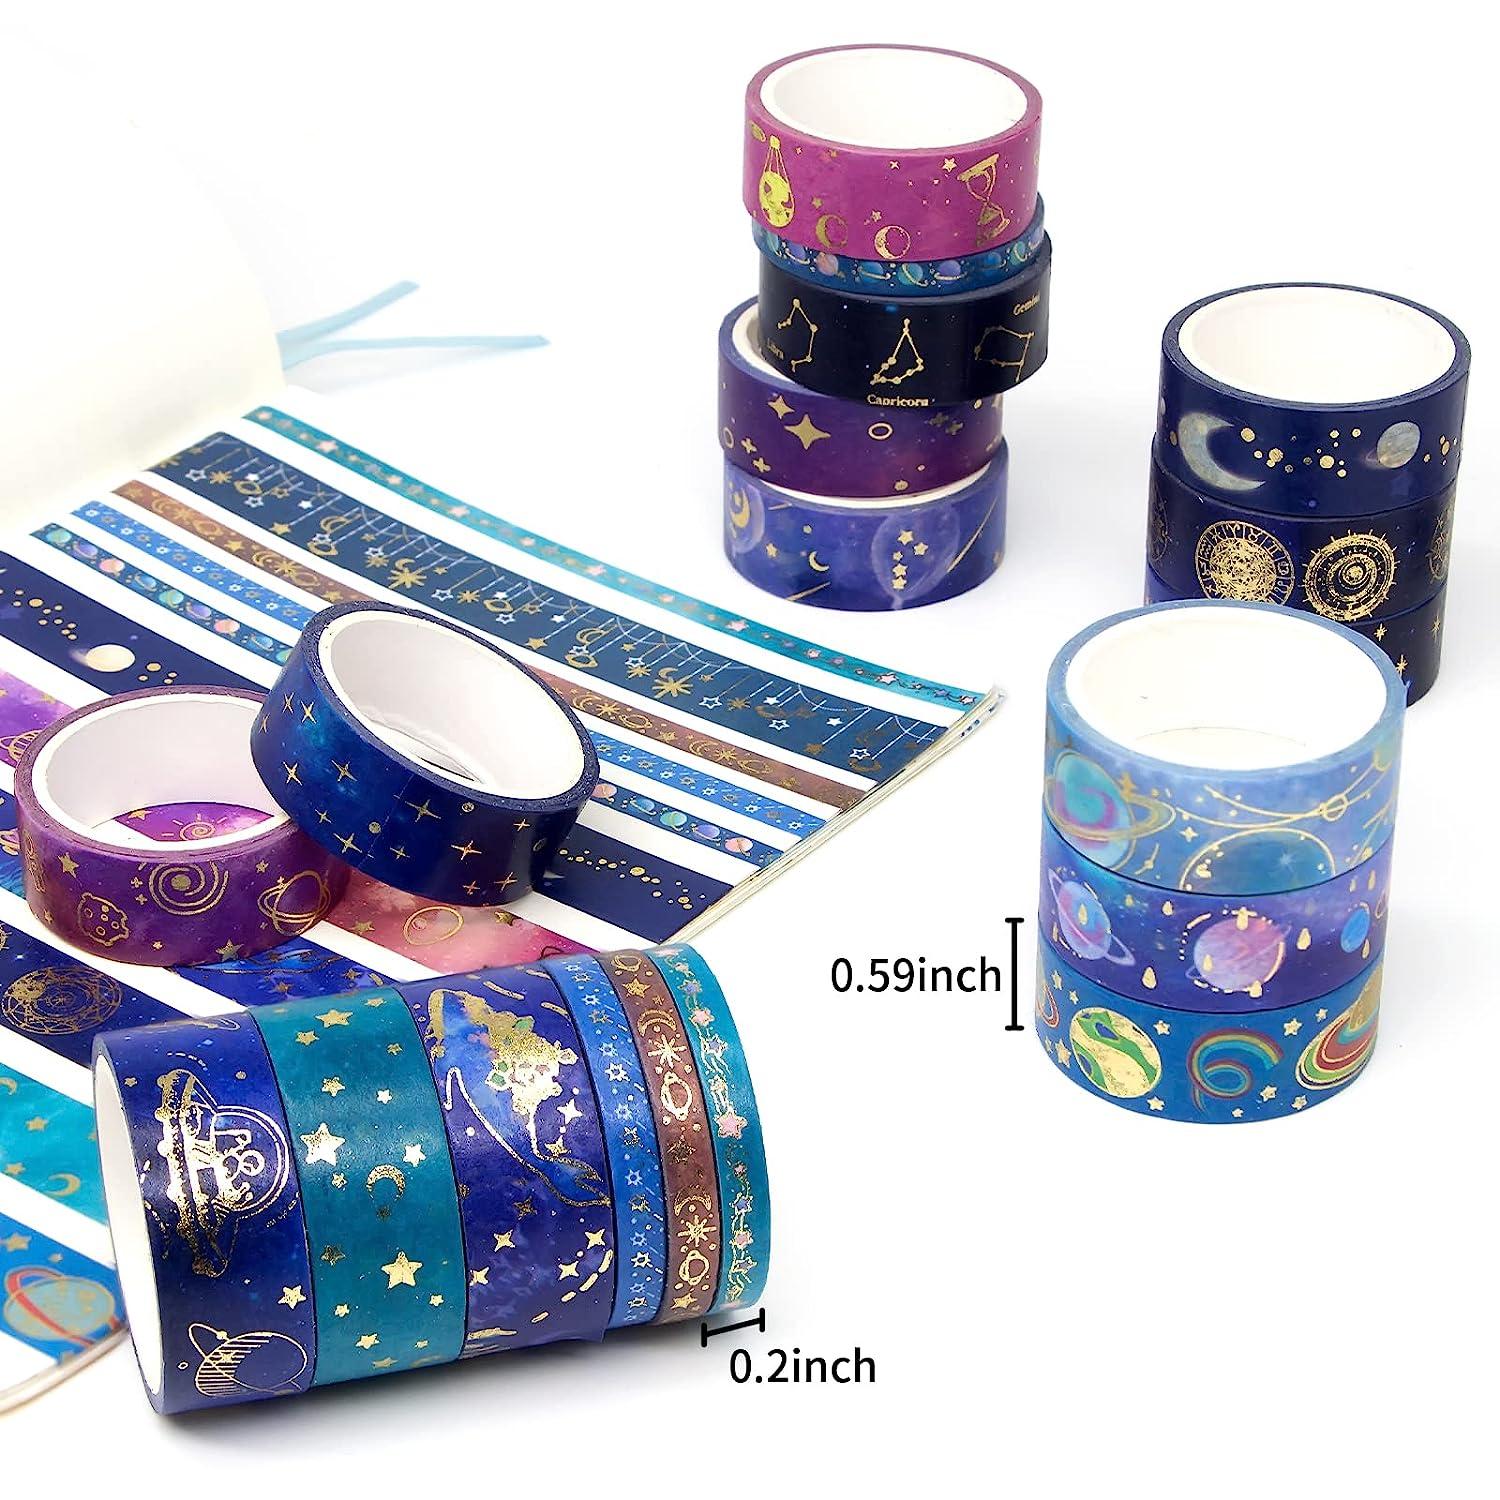 Gold Foil Washi Masking Tape 15mm X 5m for Scrapbooking and Journal  Decoration 